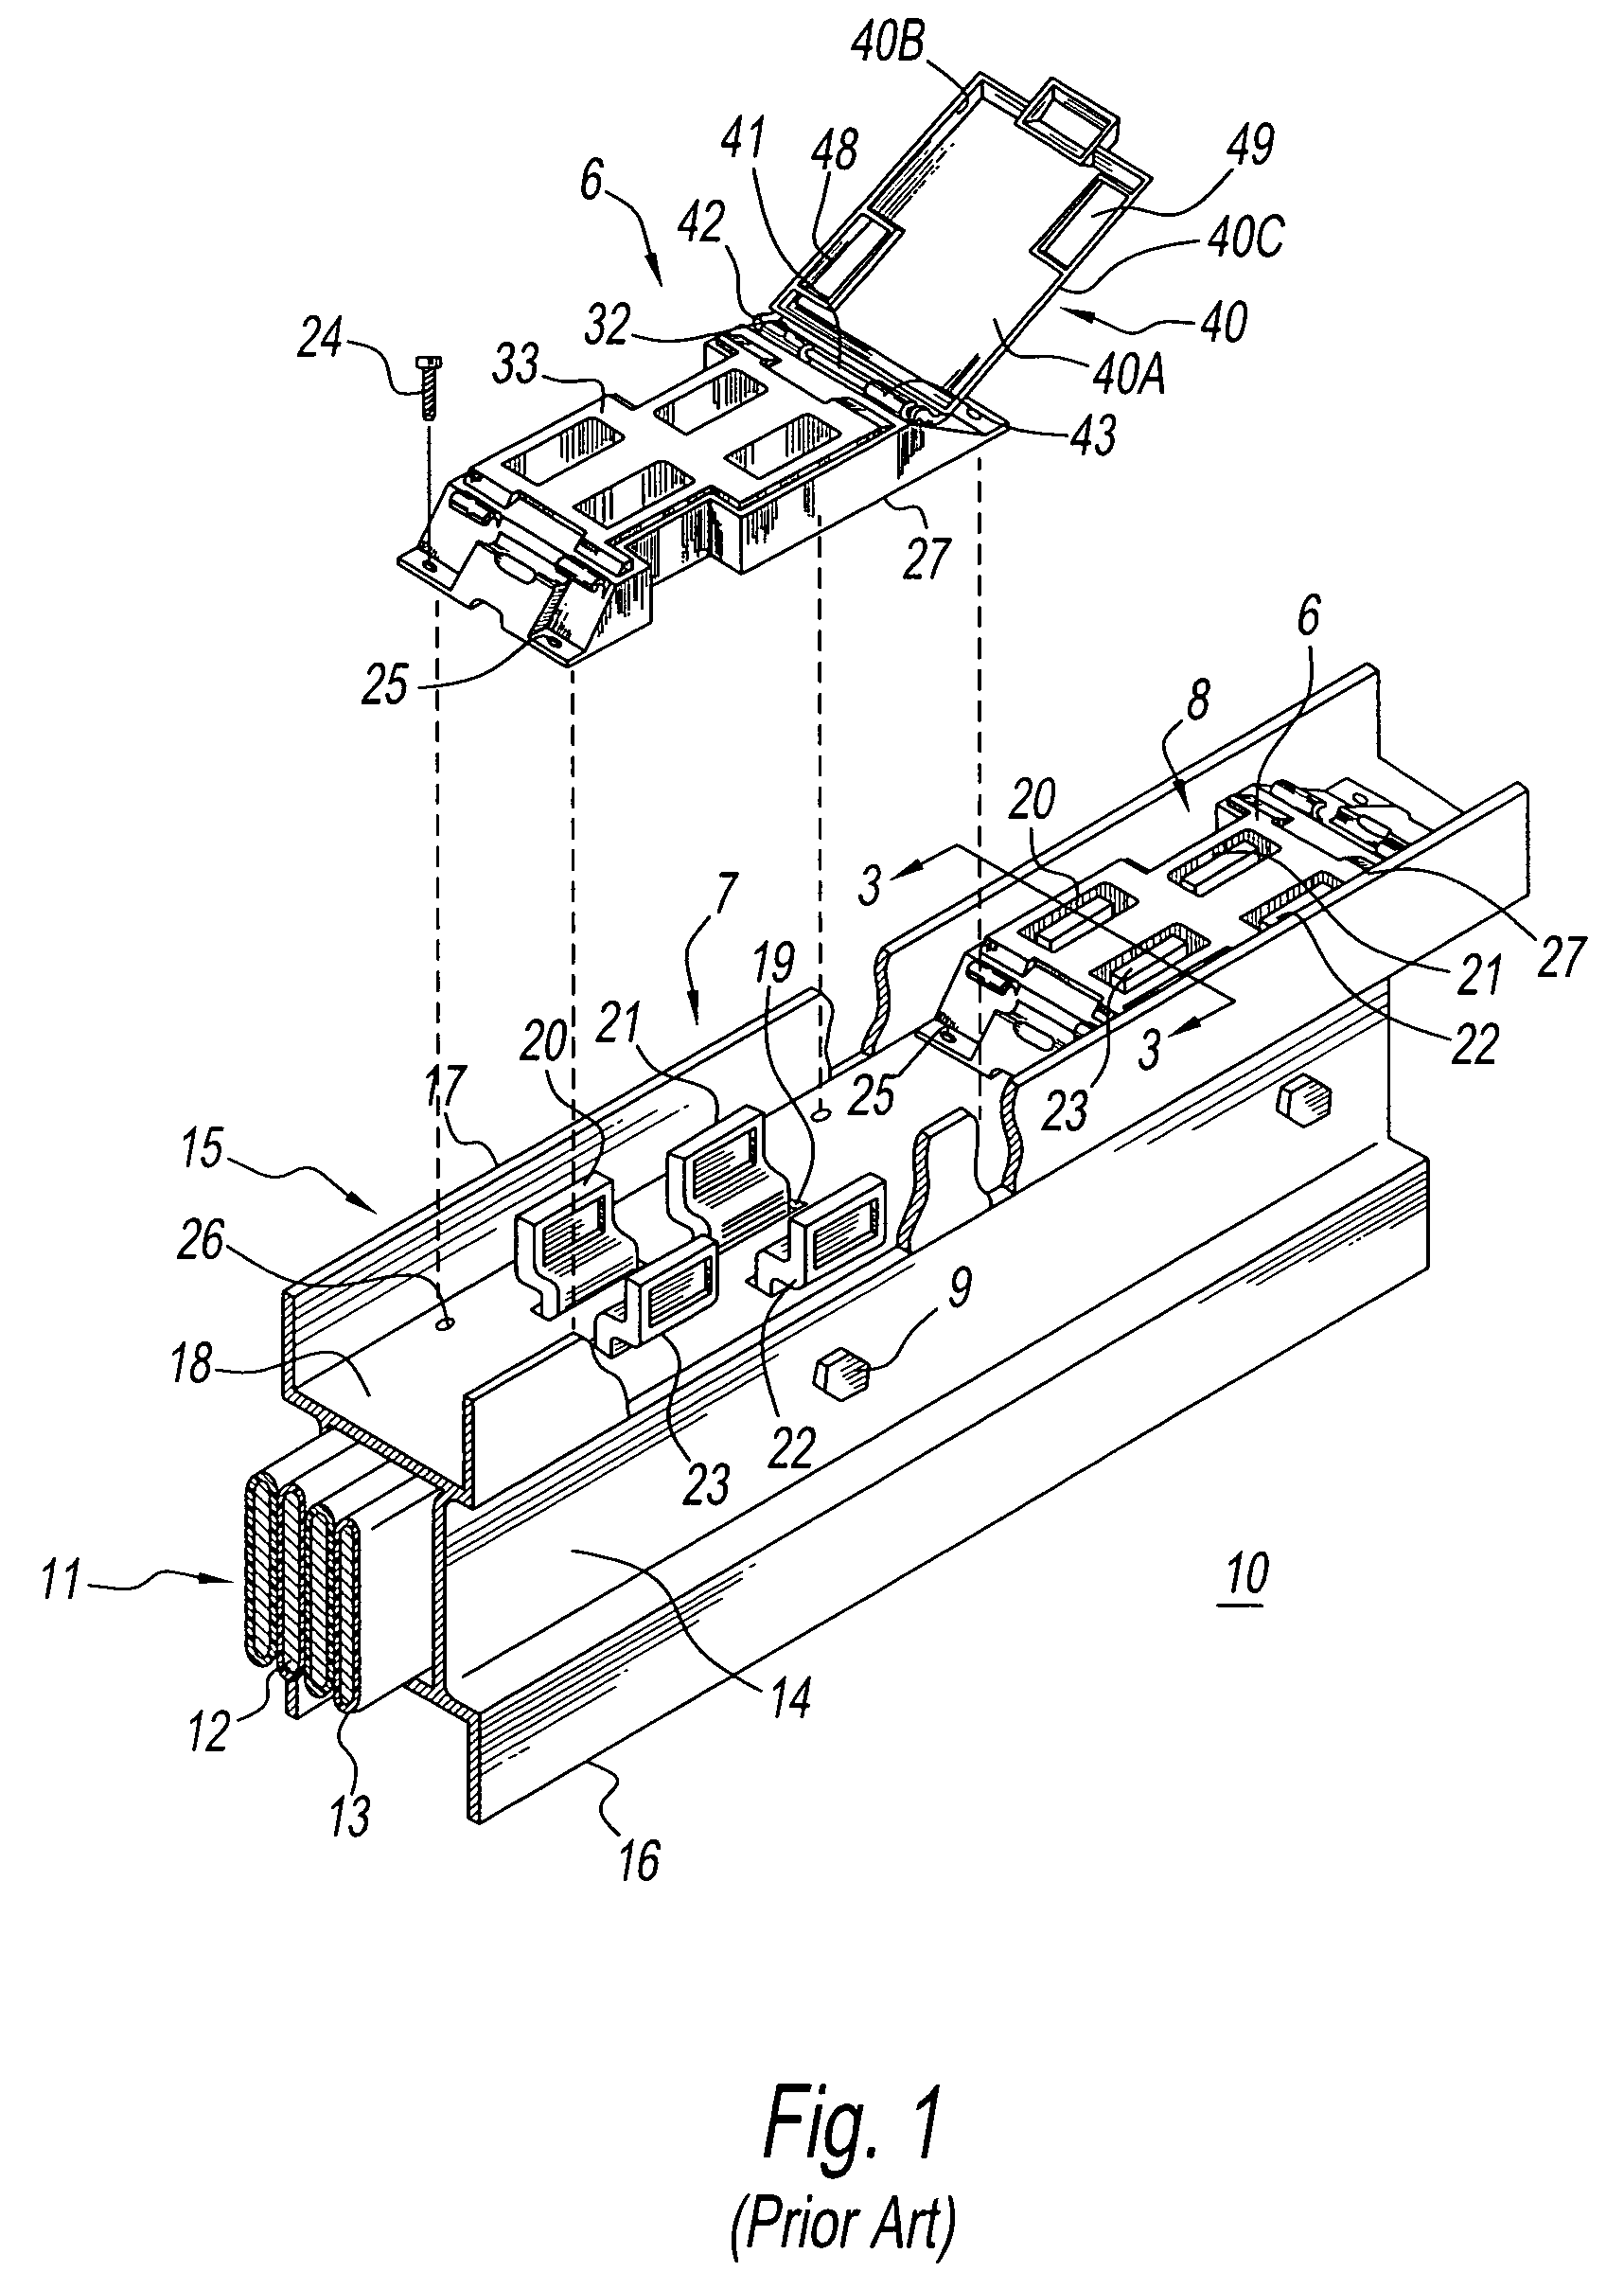 Press fit connection for mounting electrical plug-in outlet insulator to a busway aluminum housing